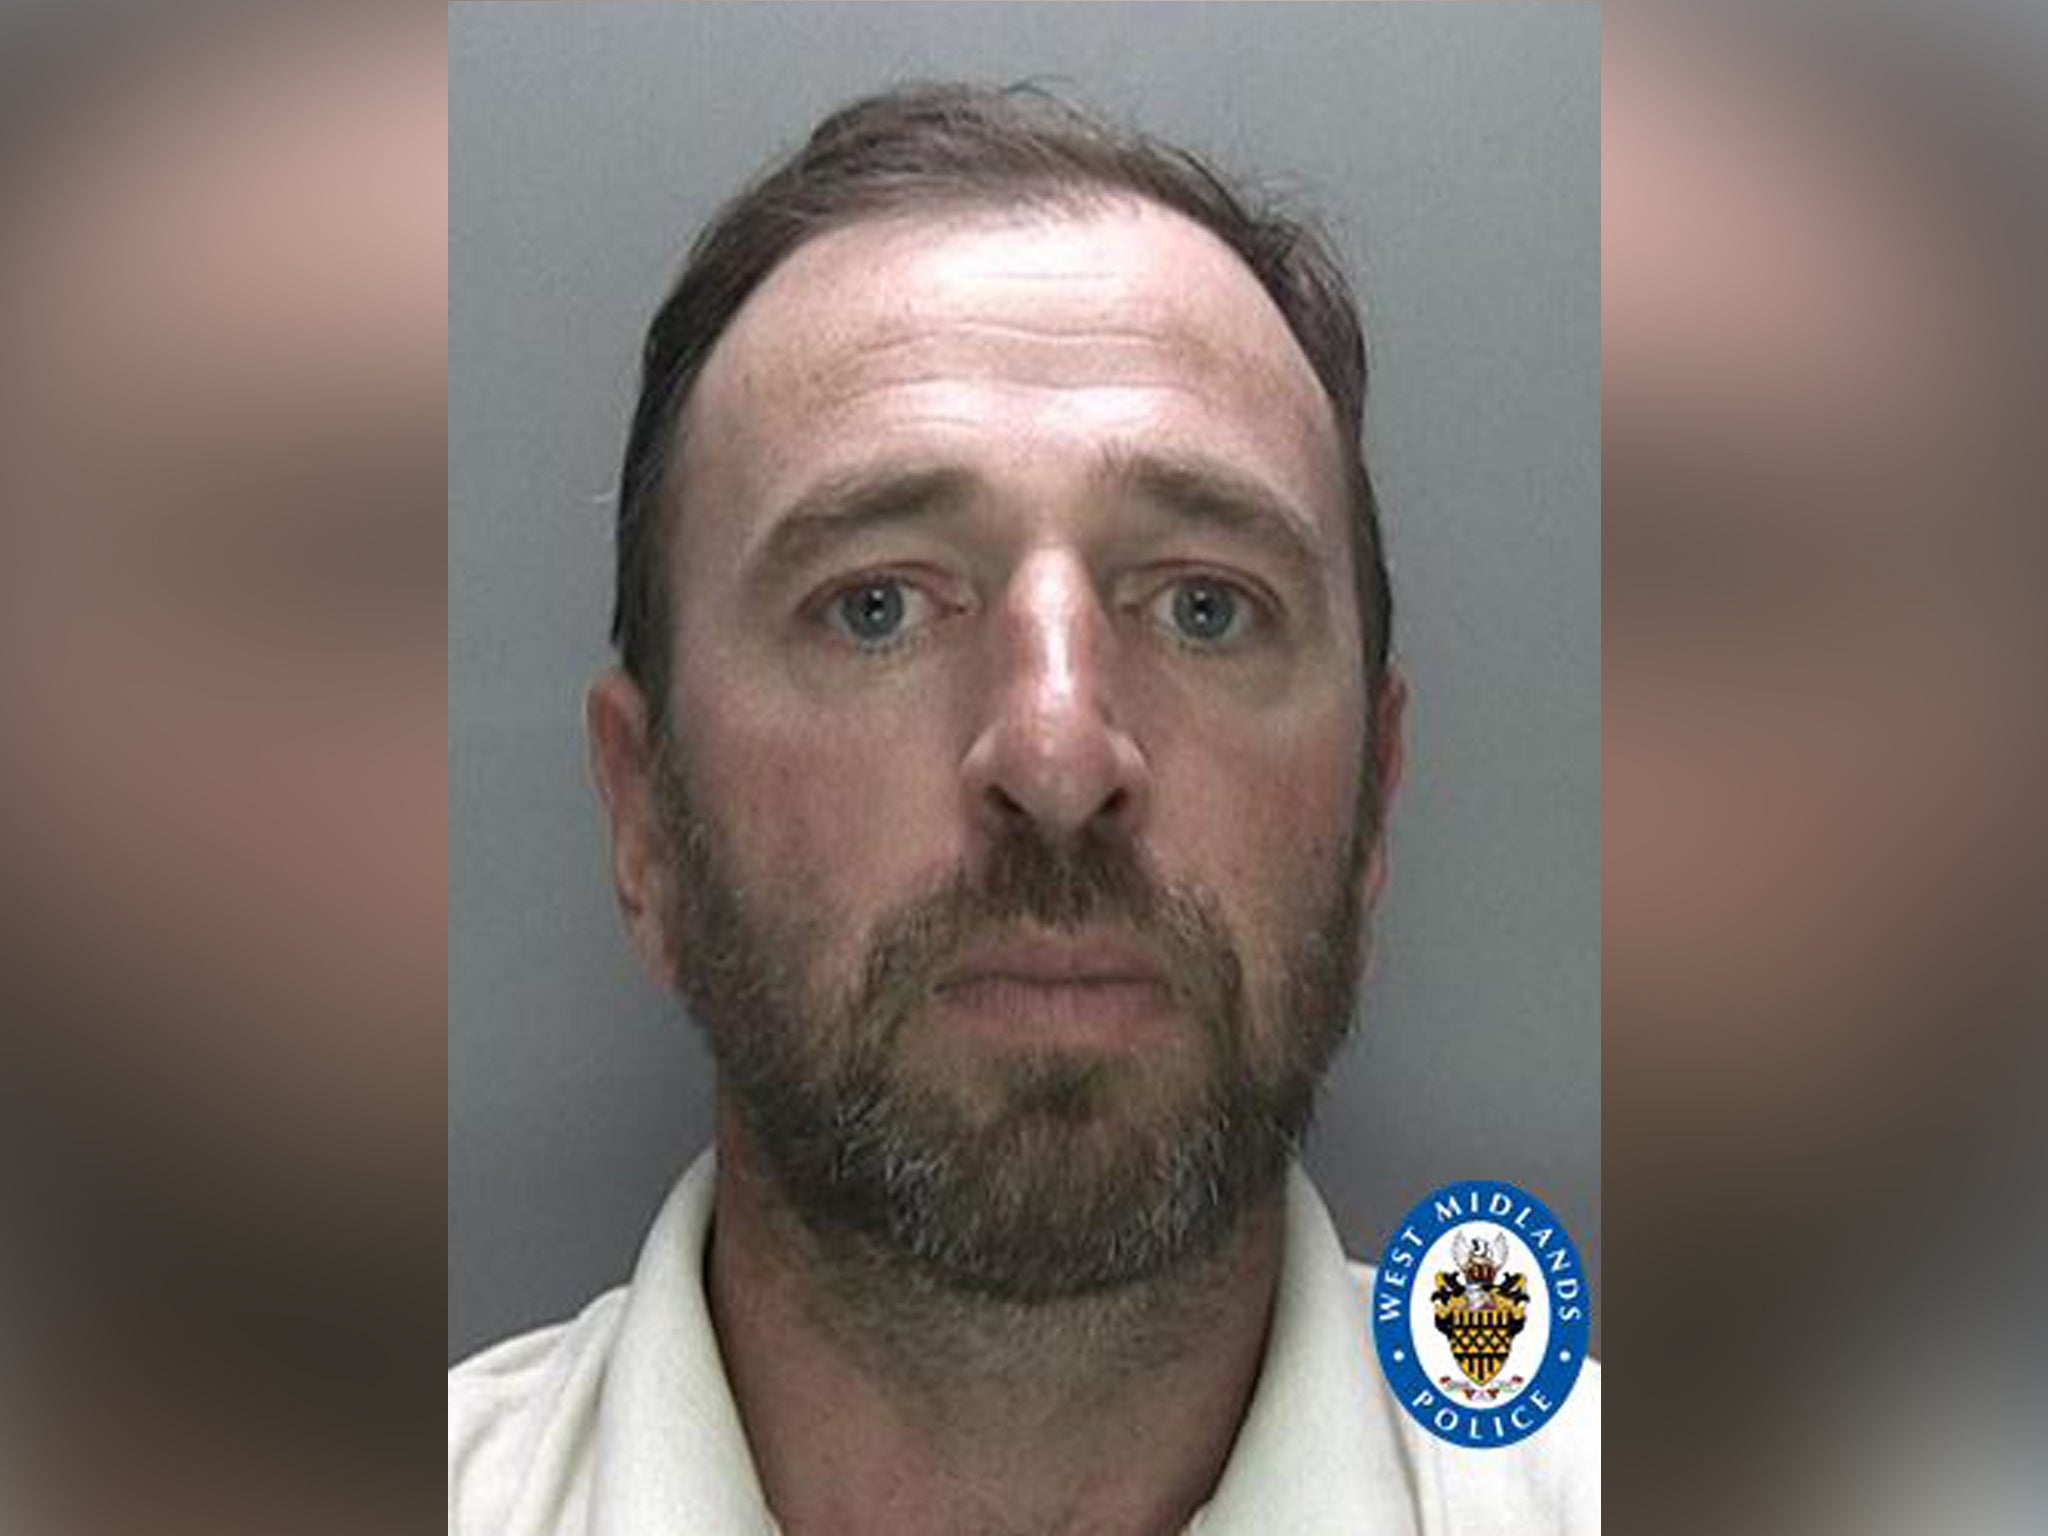 Darren Rowe, 49, was given a suspended prison sentence